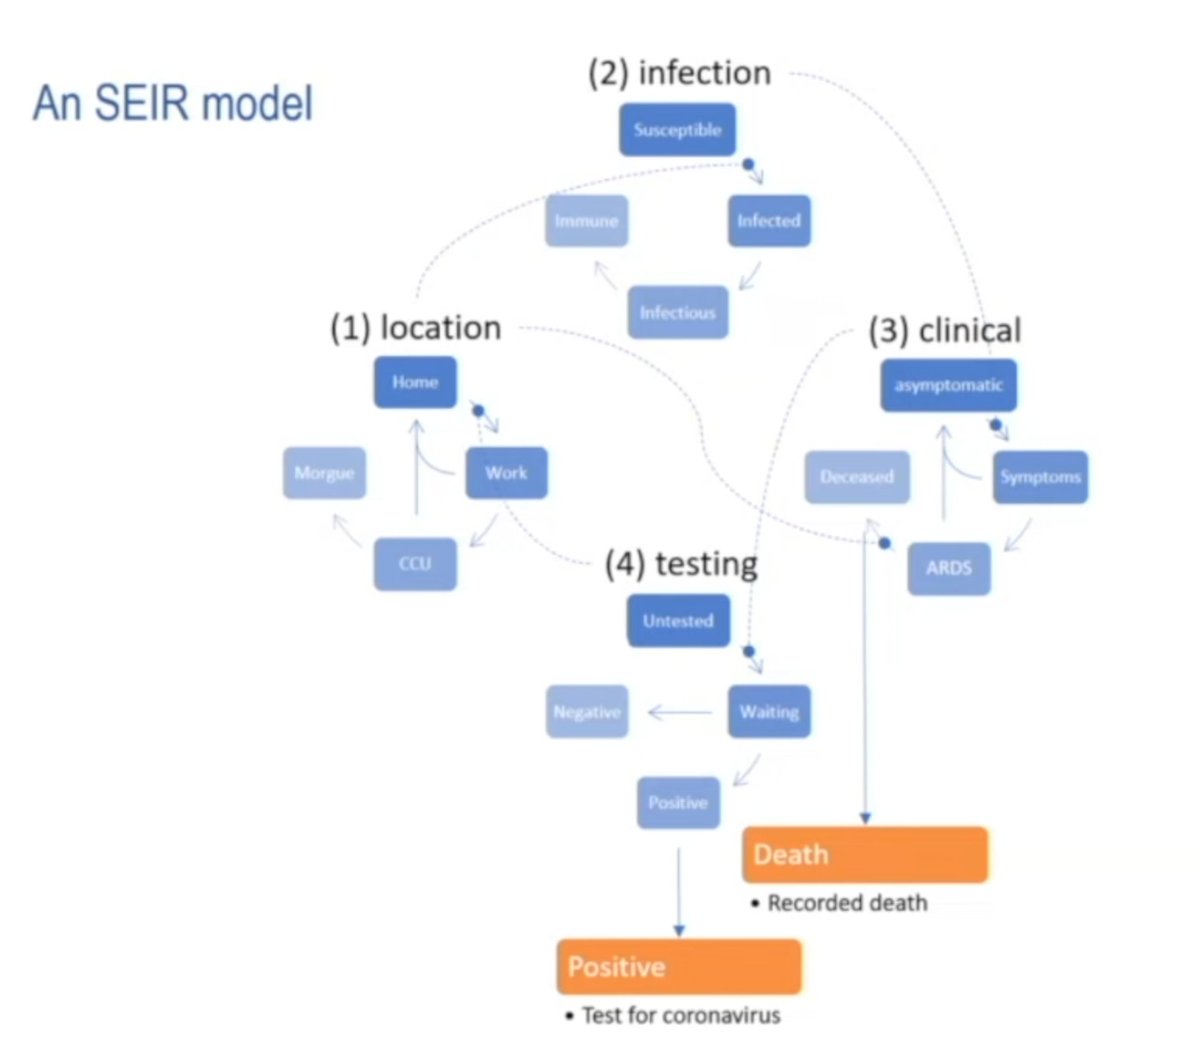 He uses an SEIR model (susceptible, exposed, infected and recovered) with four states based on your location parameters, your infection parameters, clinical parameters and testing status.